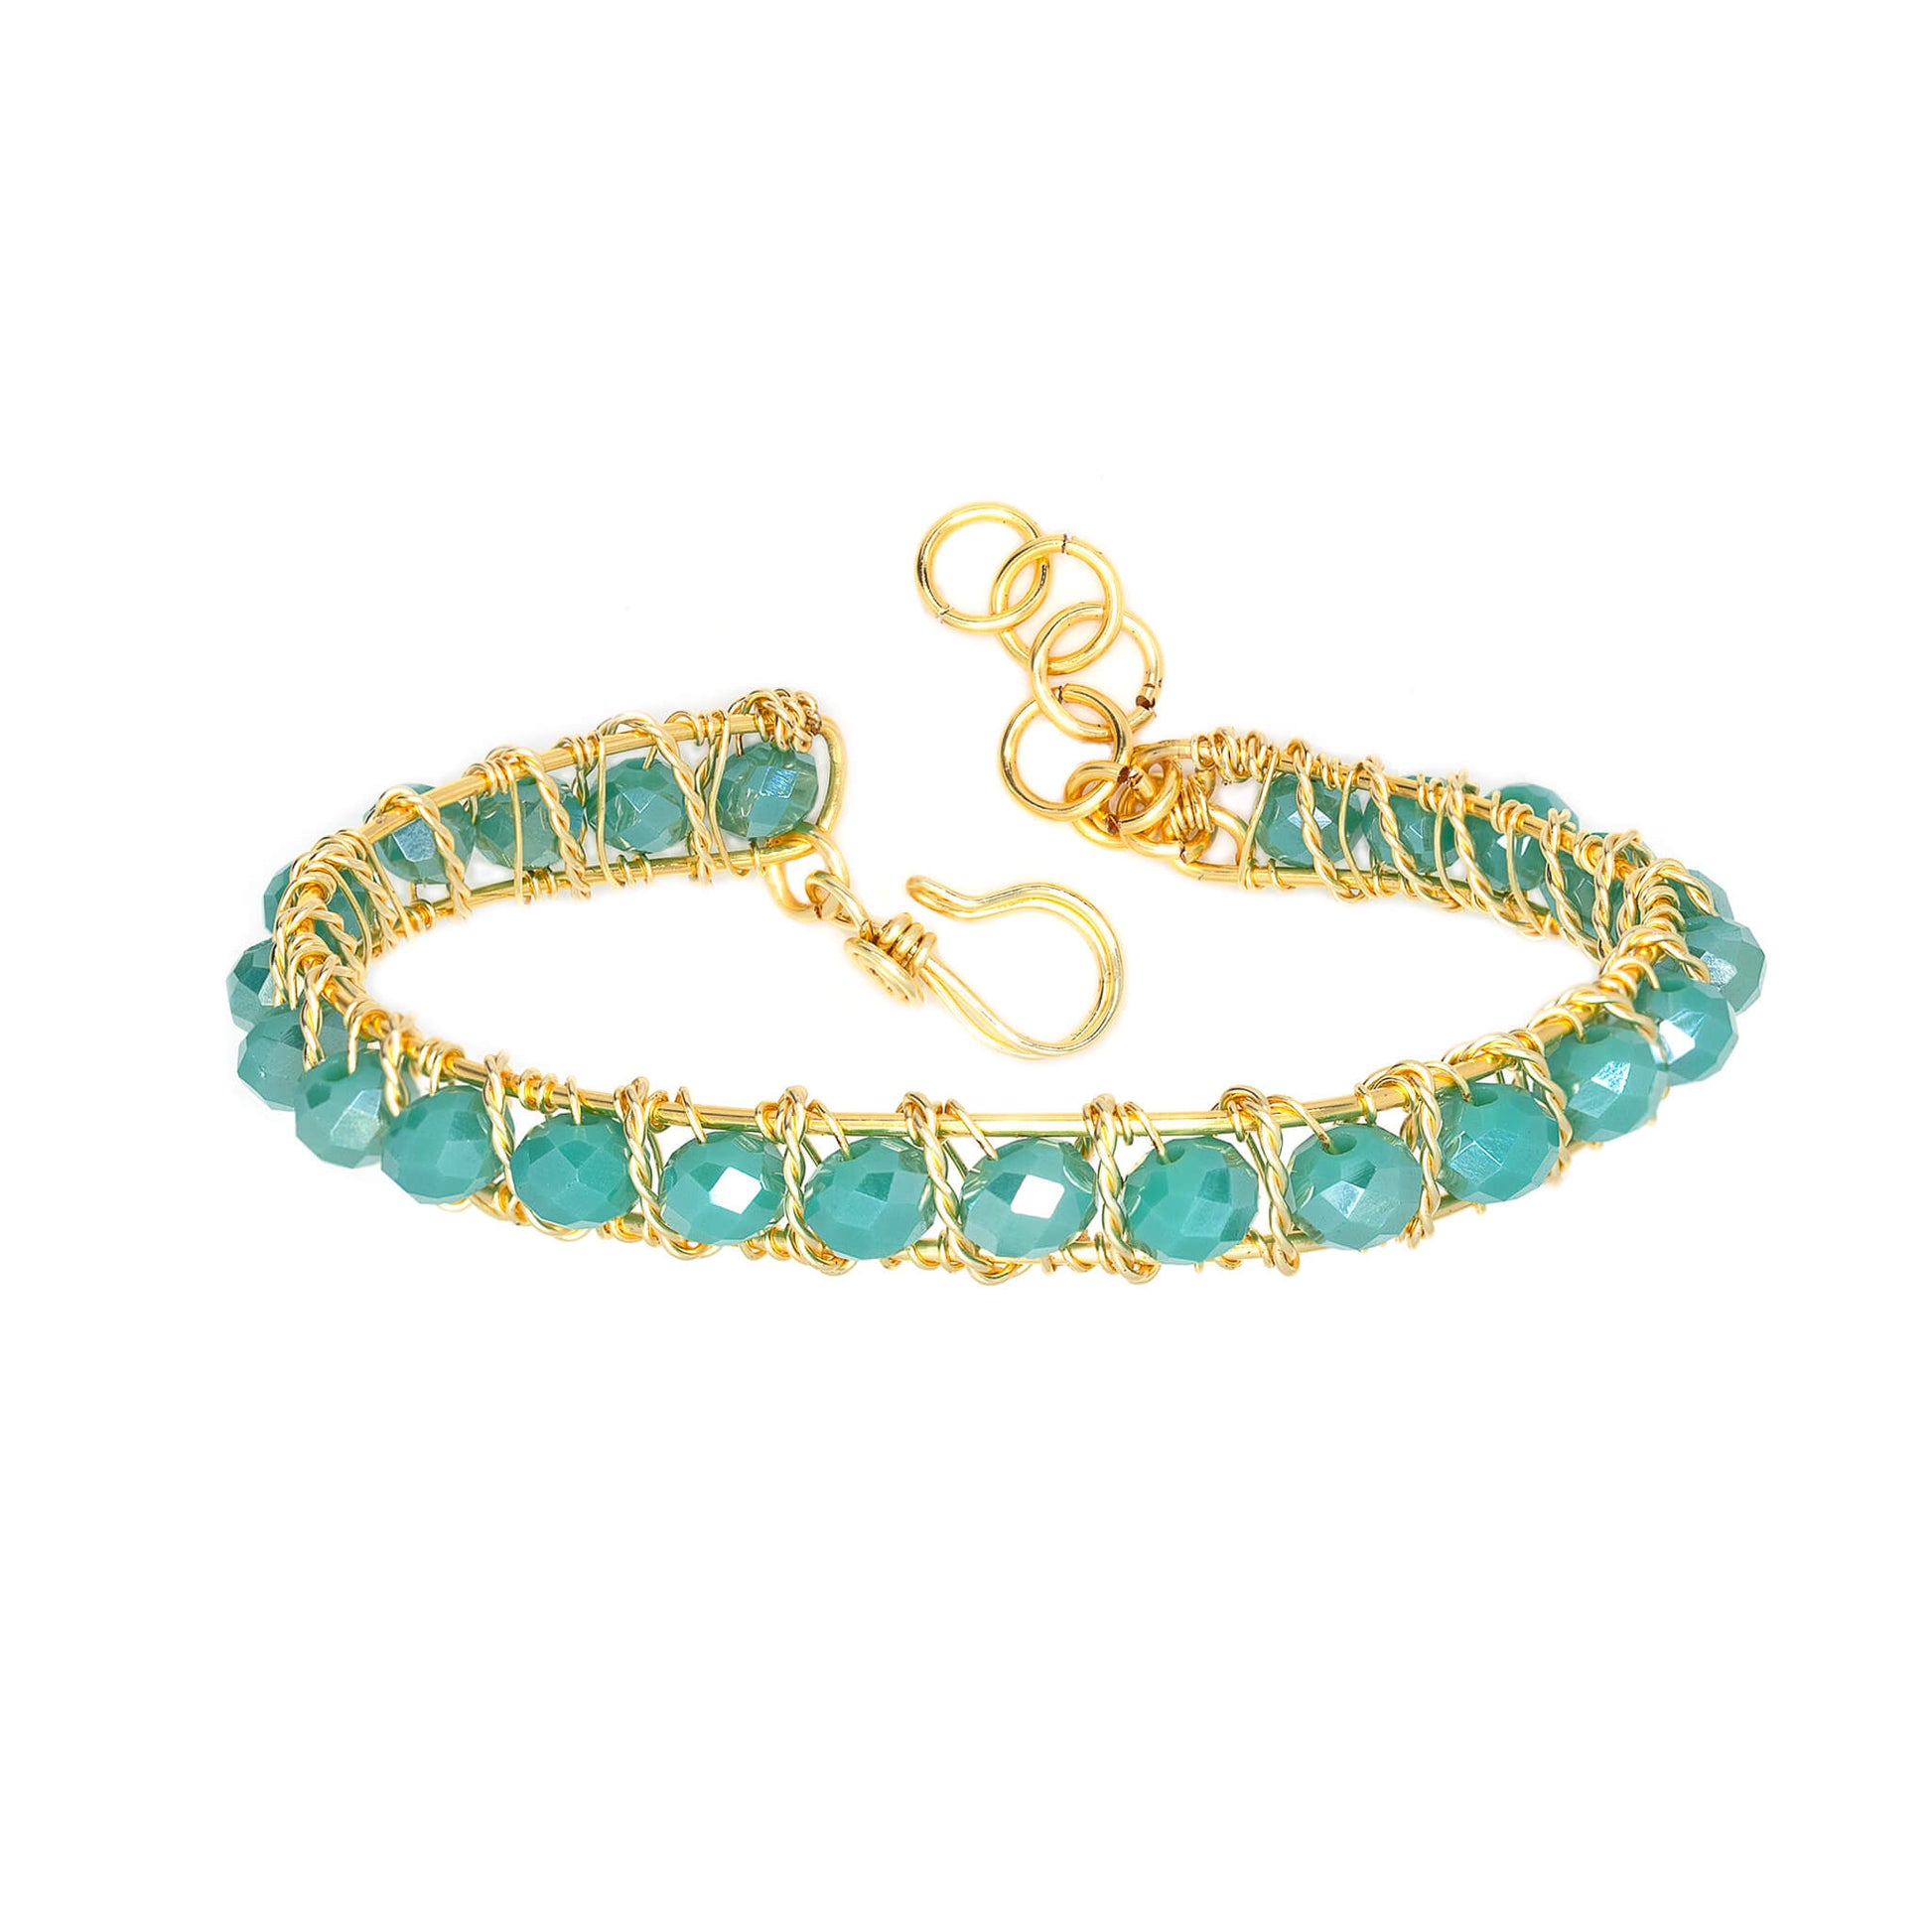 The Bogen Bracelet is one size fits all. Gold and aqua bracelet. Handmade with Non-tarnish gold plated wire and beads crystals. Wire-wrapped beaded bracelet